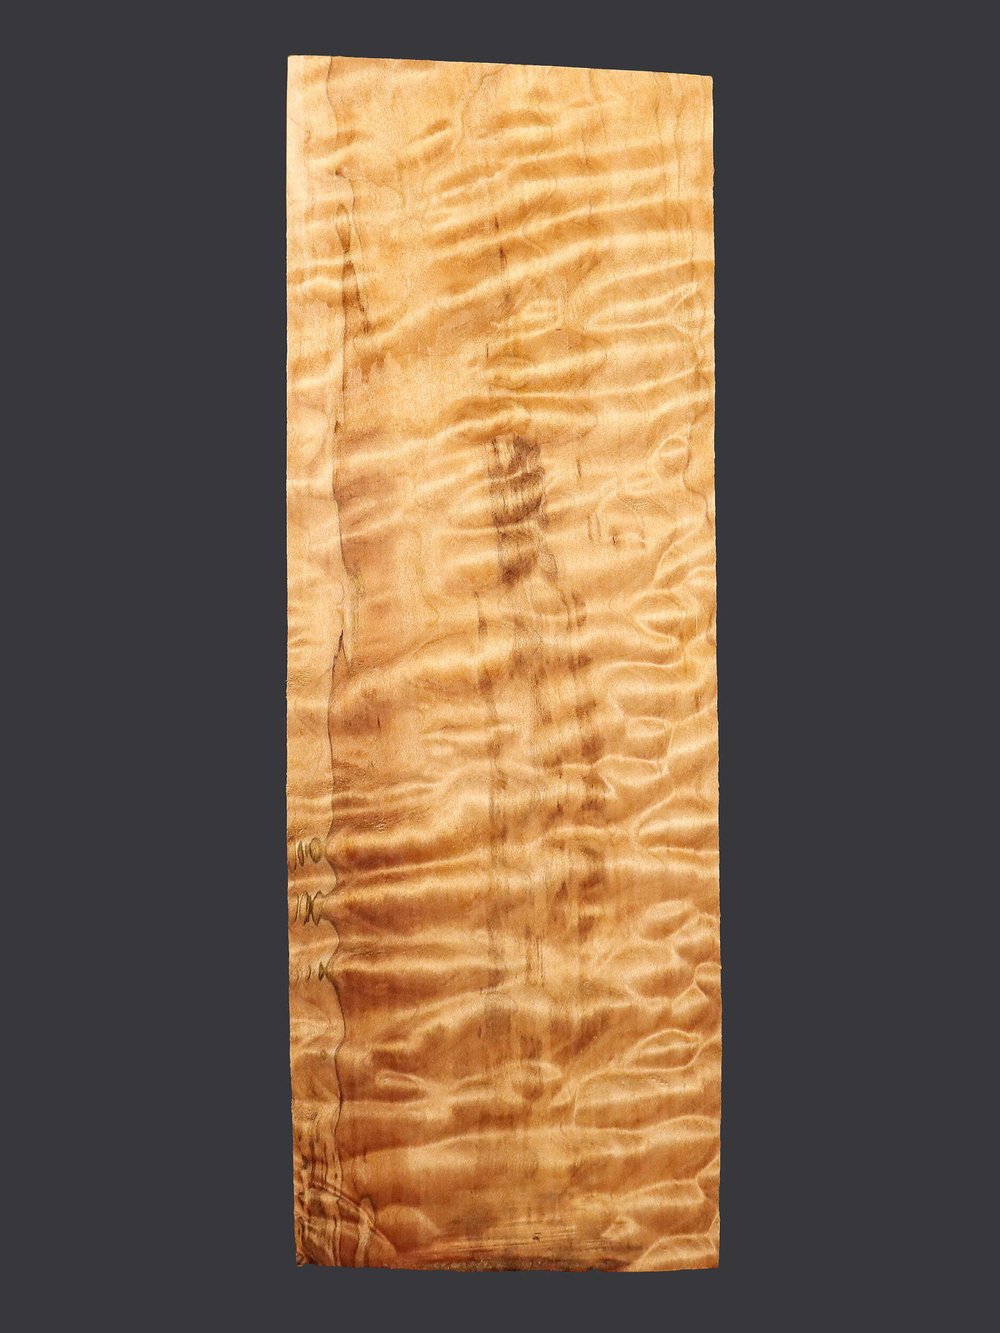 Dyed Quilted Maple Blank 5 1/4”L x 1 5/8”W x 7/8” thick